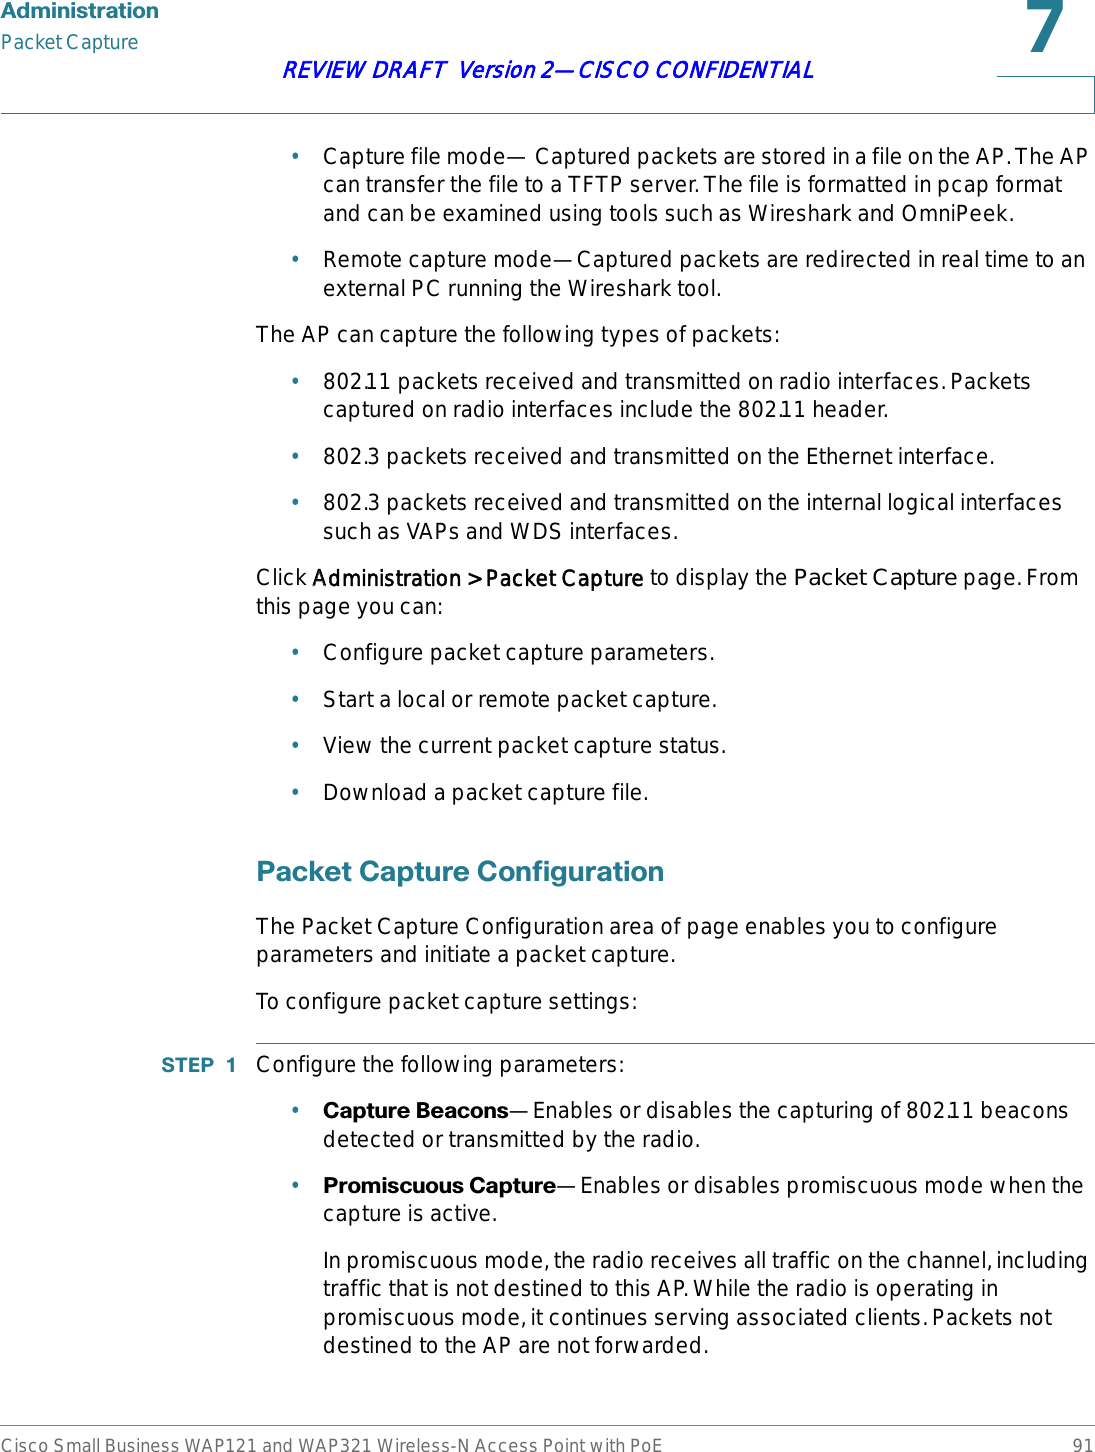 $GPLQLVWUDWLRQPacket CaptureCisco Small Business WAP121 and WAP321 Wireless-N Access Point with PoE 91REVIEW DRAFT  Version 2—CISCO CONFIDENTIAL•Capture file mode— Captured packets are stored in a file on the AP. The AP can transfer the file to a TFTP server. The file is formatted in pcap format and can be examined using tools such as Wireshark and OmniPeek.•Remote capture mode—Captured packets are redirected in real time to an external PC running the Wireshark tool.The AP can capture the following types of packets:•802.11 packets received and transmitted on radio interfaces. Packets captured on radio interfaces include the 802.11 header.•802.3 packets received and transmitted on the Ethernet interface.•802.3 packets received and transmitted on the internal logical interfaces such as VAPs and WDS interfaces.Click AAdministration &gt; Packet Capture to display the Packet Capture page. From this page you can:•Configure packet capture parameters.•Start a local or remote packet capture.•View the current packet capture status.•Download a packet capture file.3DFNHW&amp;DSWXUH&amp;RQILJXUDWLRQThe Packet Capture Configuration area of page enables you to configure parameters and initiate a packet capture.To configure packet capture settings:67(3  Configure the following parameters:•&amp;DSWXUH%HDFRQV—Enables or disables the capturing of 802.11 beacons detected or transmitted by the radio.•3URPLVFXRXV&amp;DSWXUH—Enables or disables promiscuous mode when the capture is active. In promiscuous mode, the radio receives all traffic on the channel, including traffic that is not destined to this AP. While the radio is operating in promiscuous mode, it continues serving associated clients. Packets not destined to the AP are not forwarded.